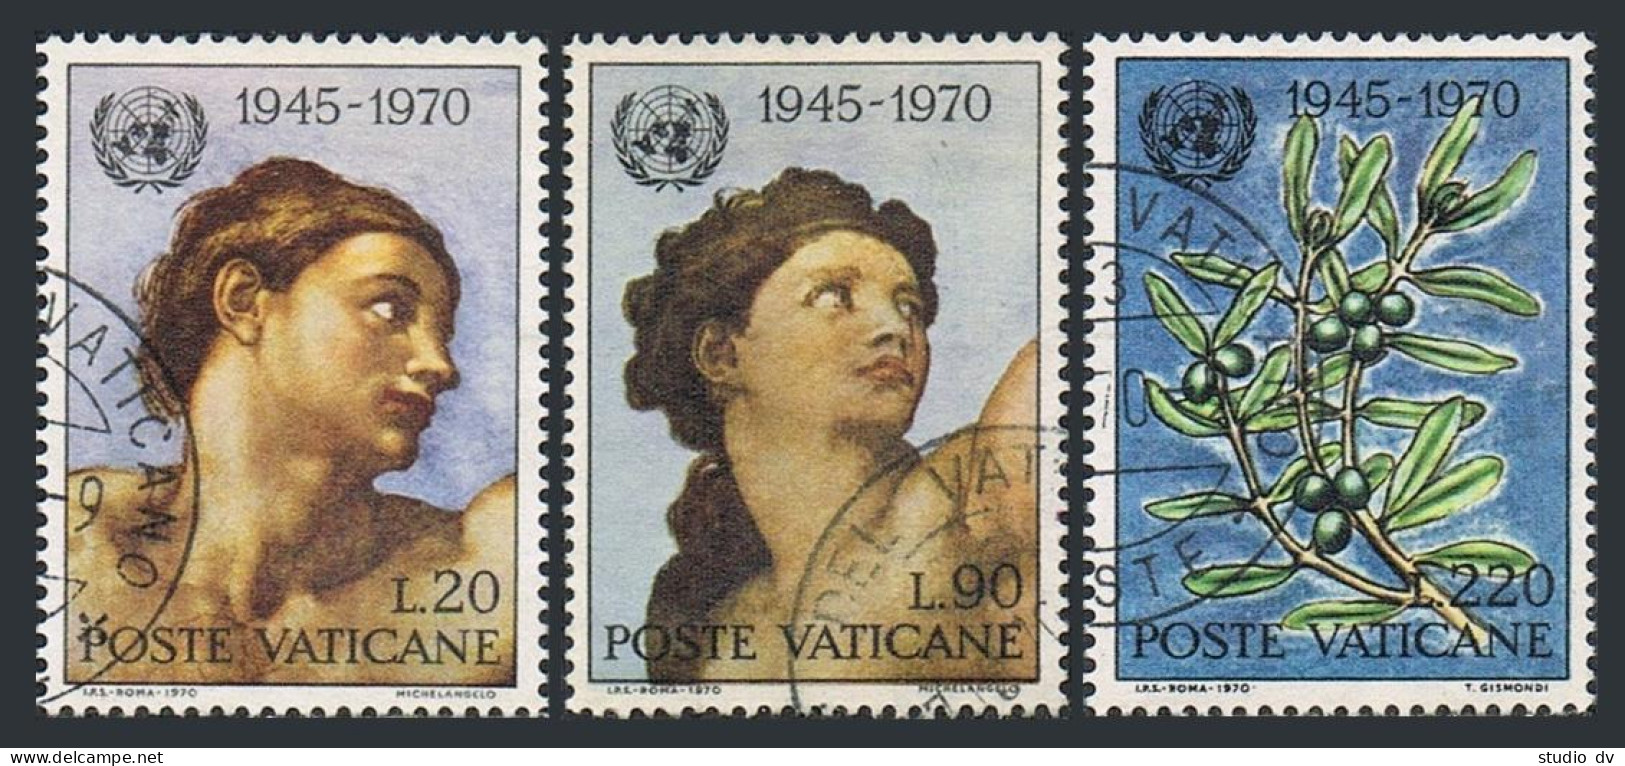 Vatican 492-494, CTO. Michel 569-571. UN-25.Adam, Eve By Michelangelo, Olive Branch. - Used Stamps